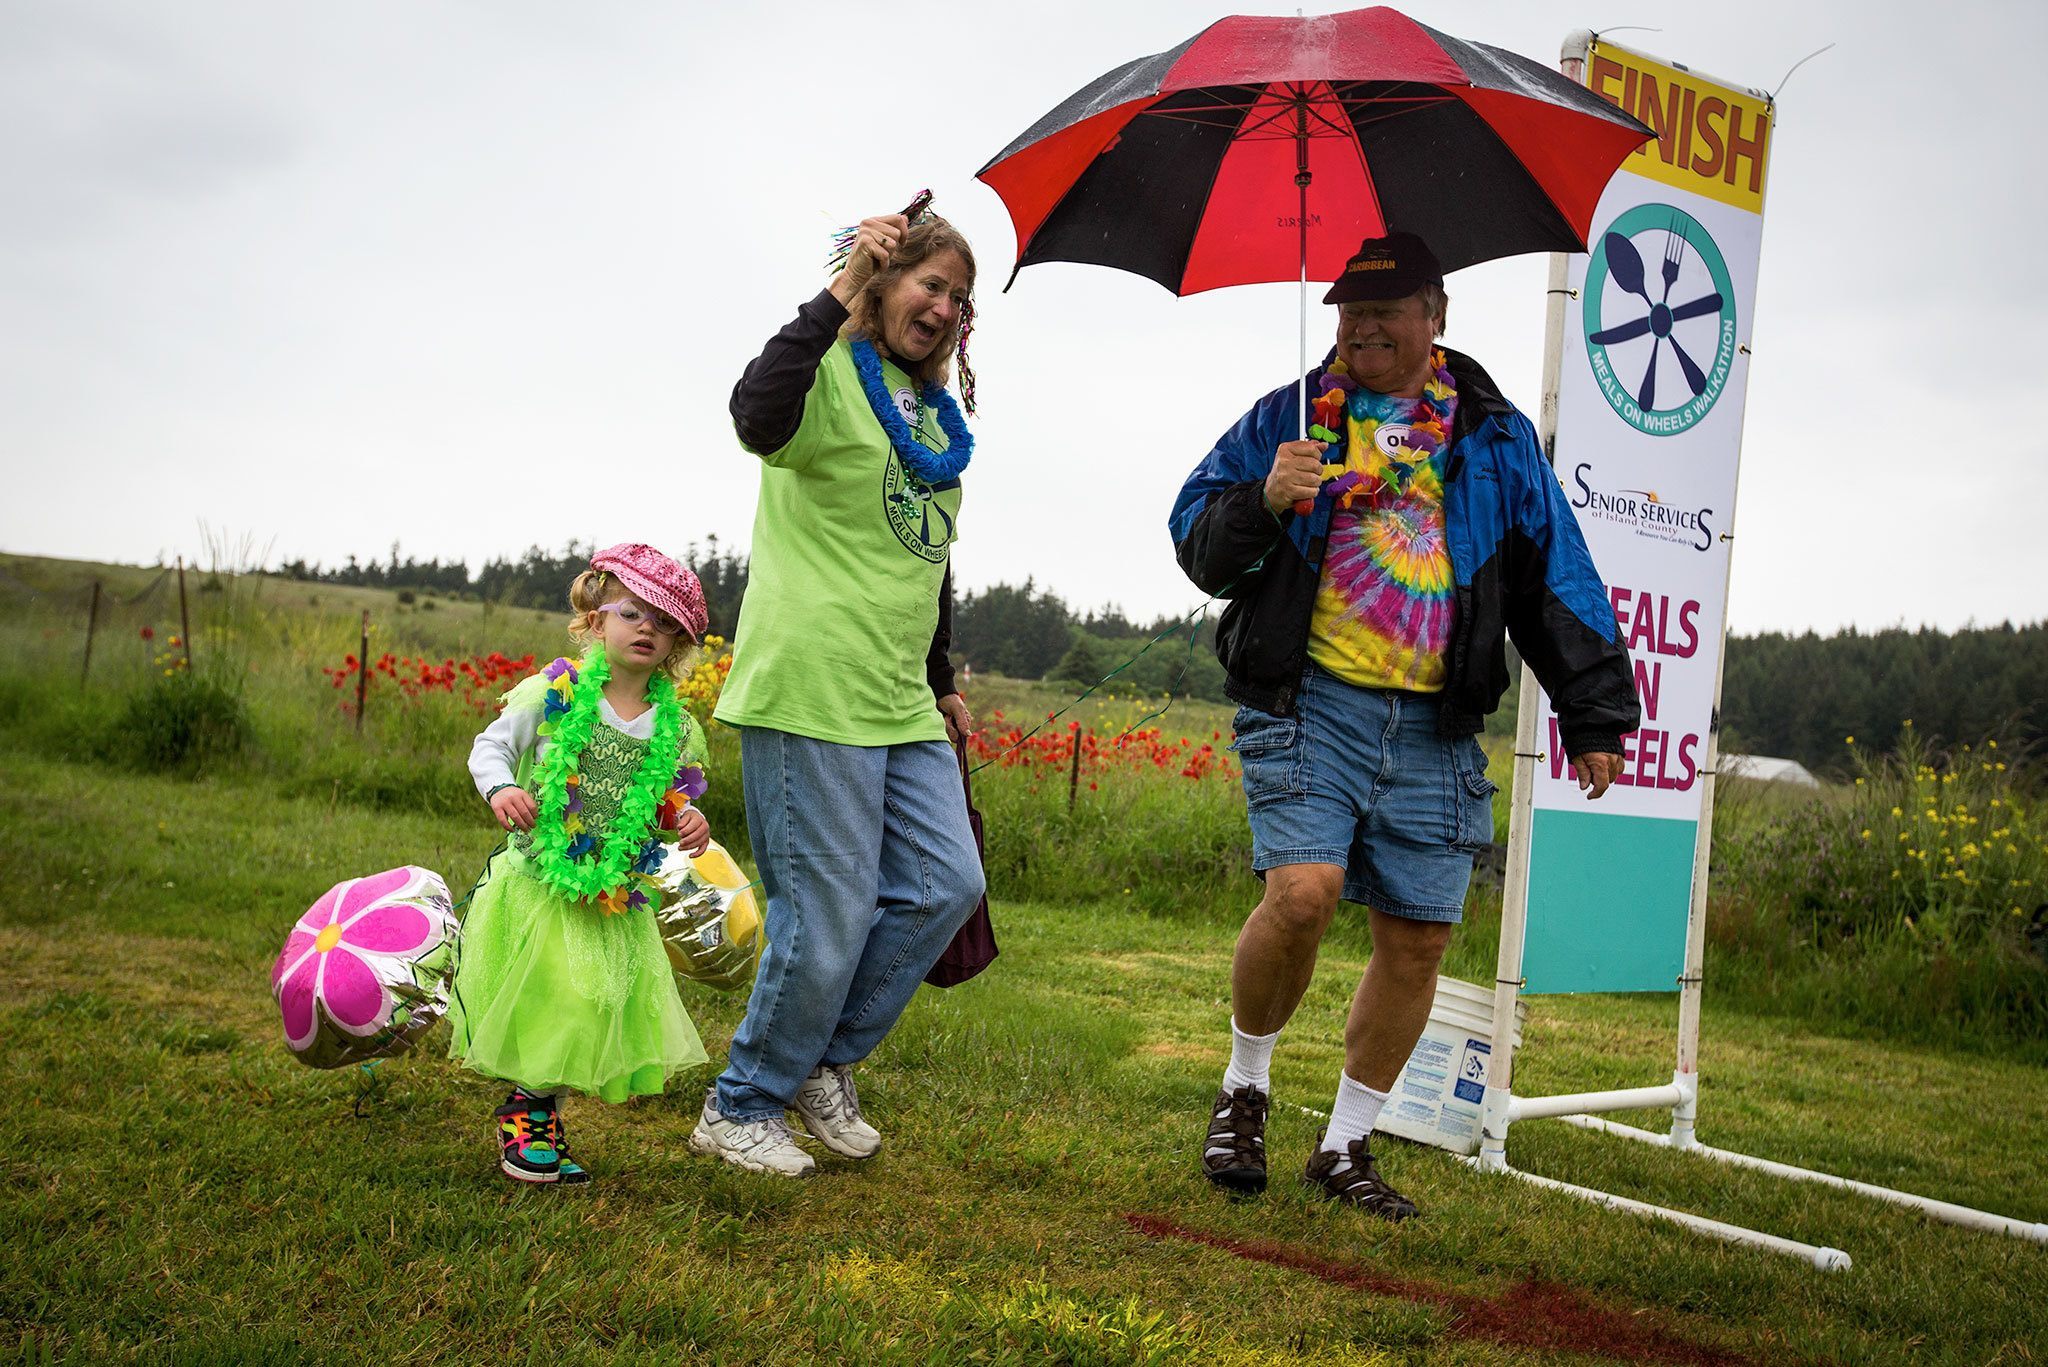 Eric and Wendy Geyer cross the finish line with their 3-year-old granddaughter, Bailee Furness, during the Meals on Wheels Walkathon and fundraiser on May 21 on Whidbey Island. (Daniella Beccaria / For the Herald)